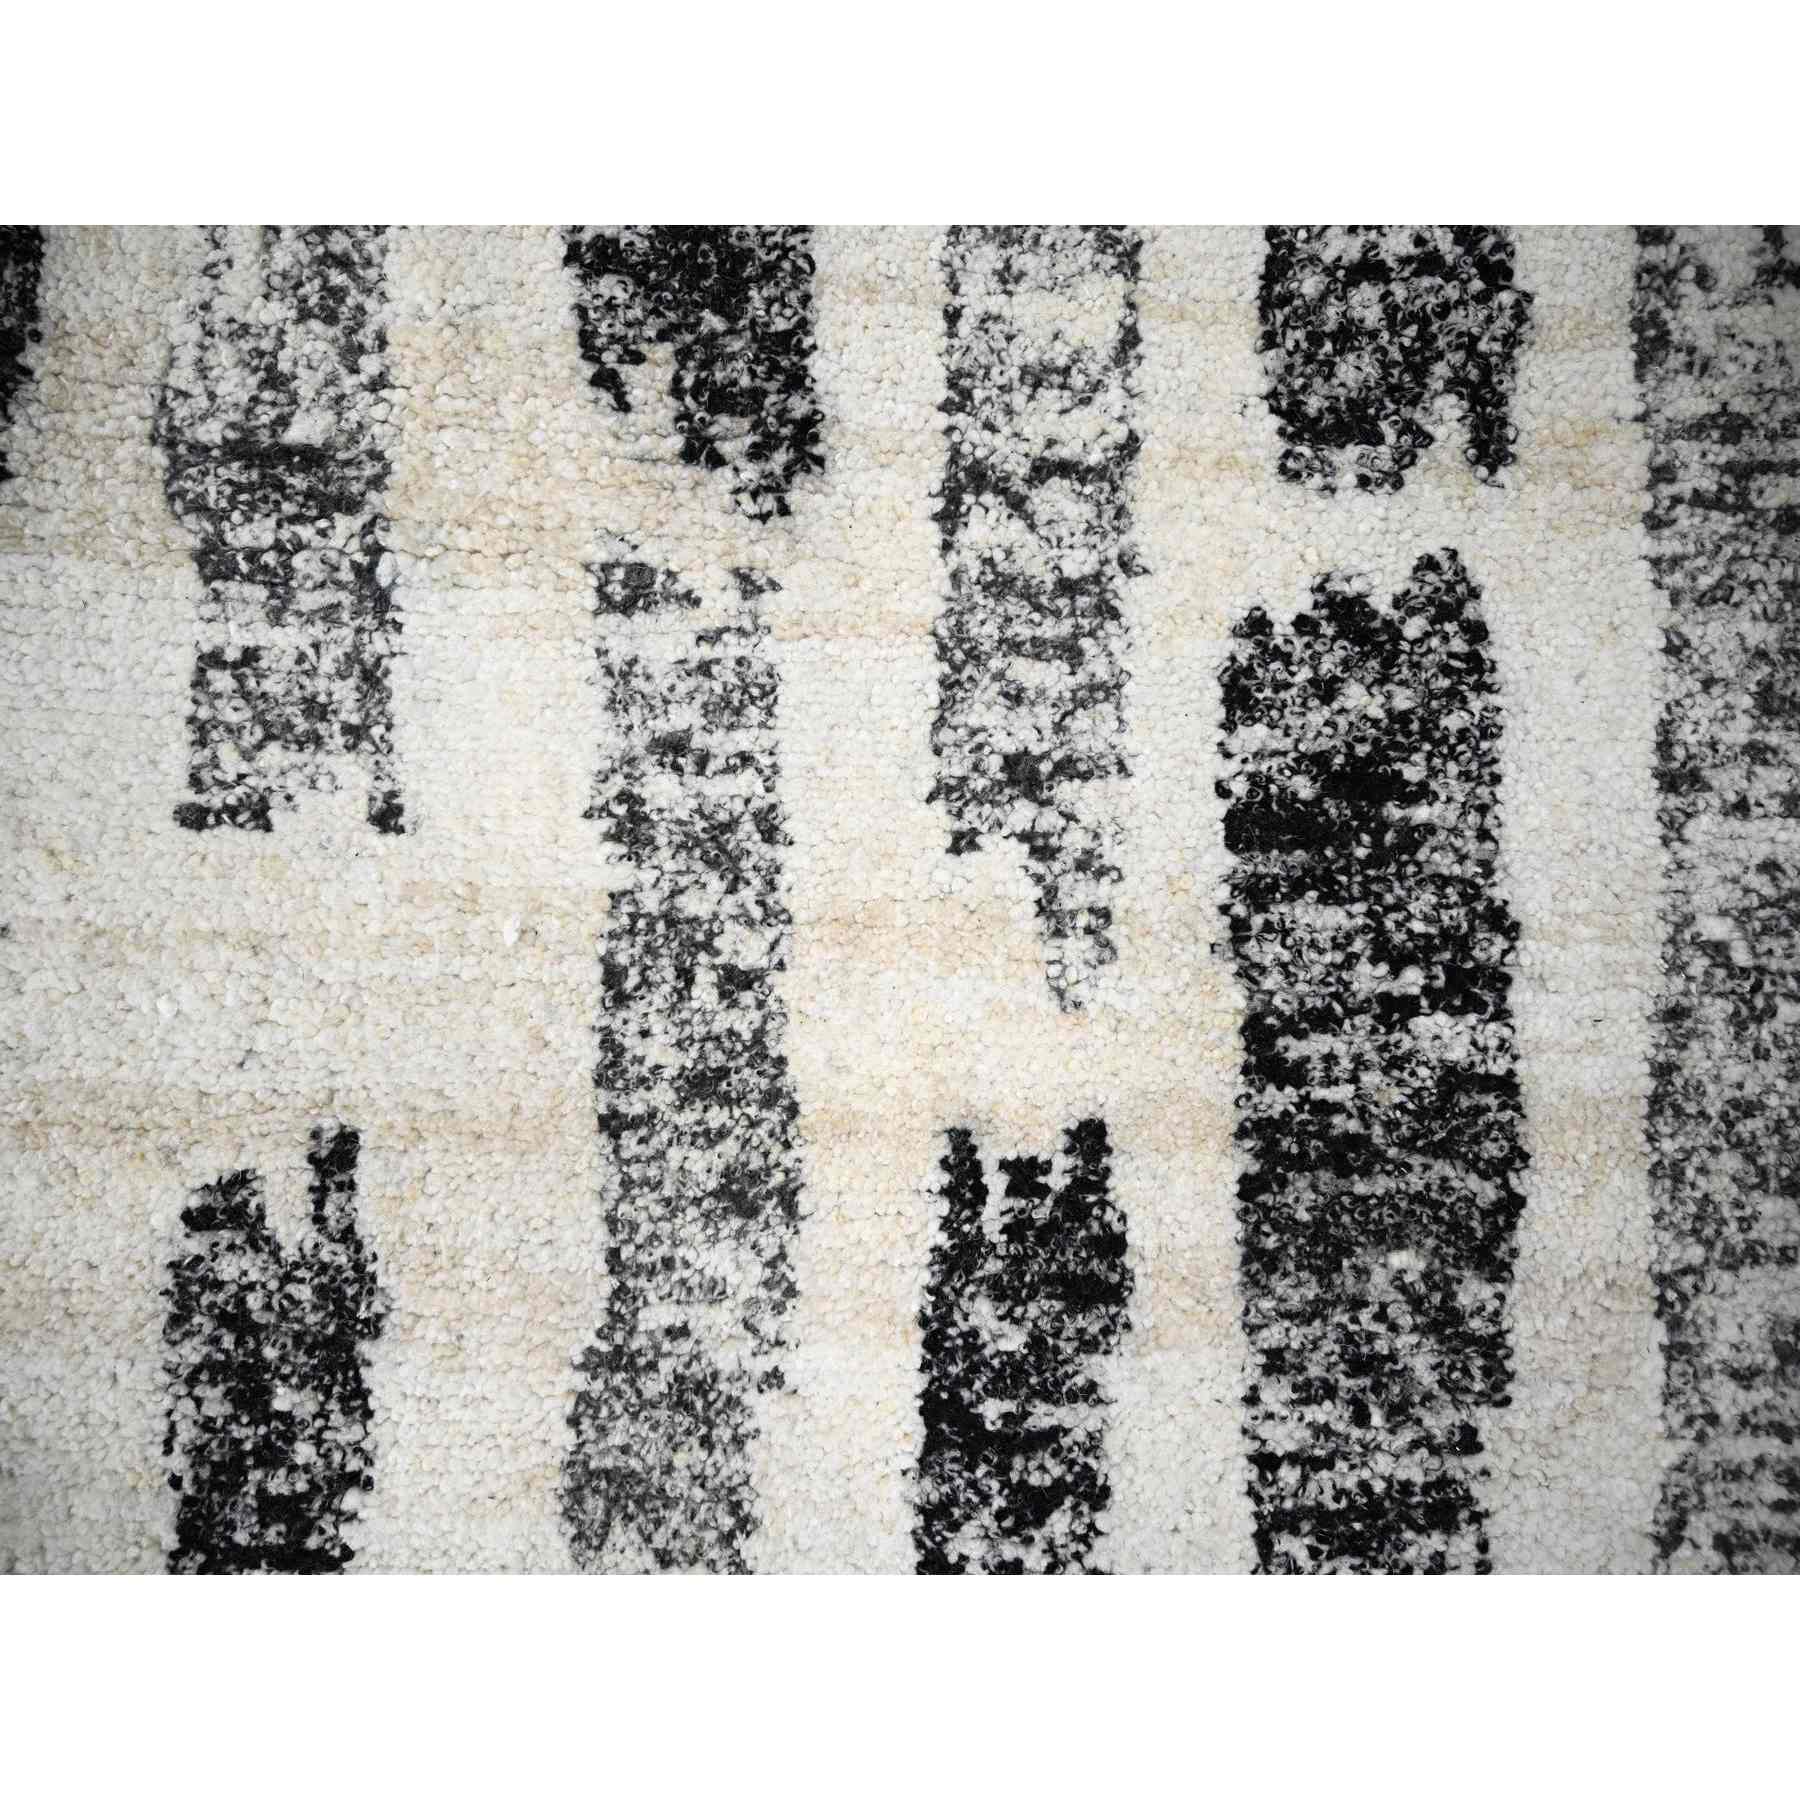 Modern-and-Contemporary-Hand-Knotted-Rug-421035